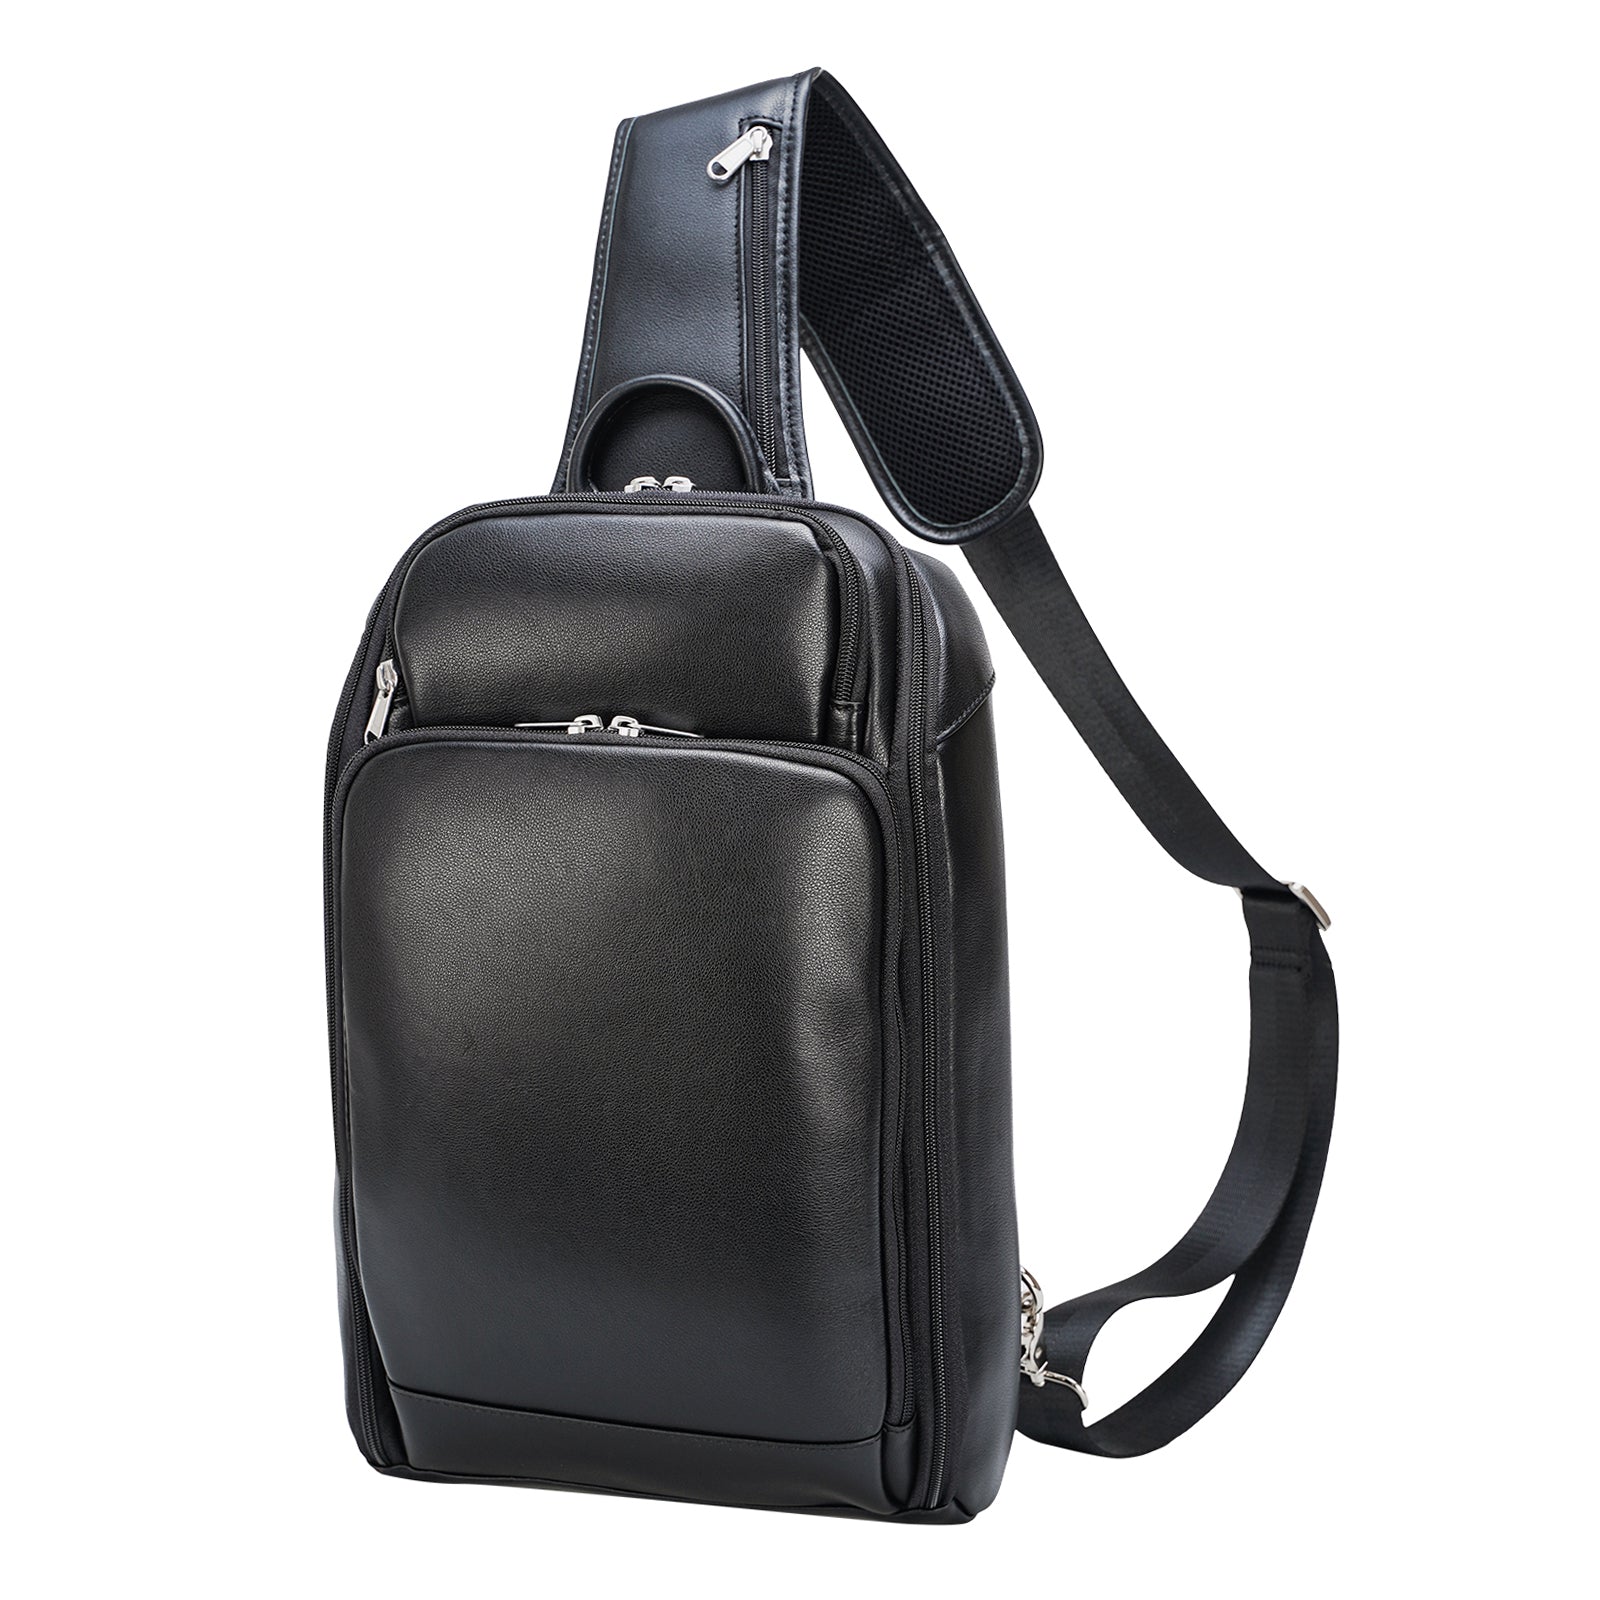 This Popular Sling Bag Is $20 at Amazon